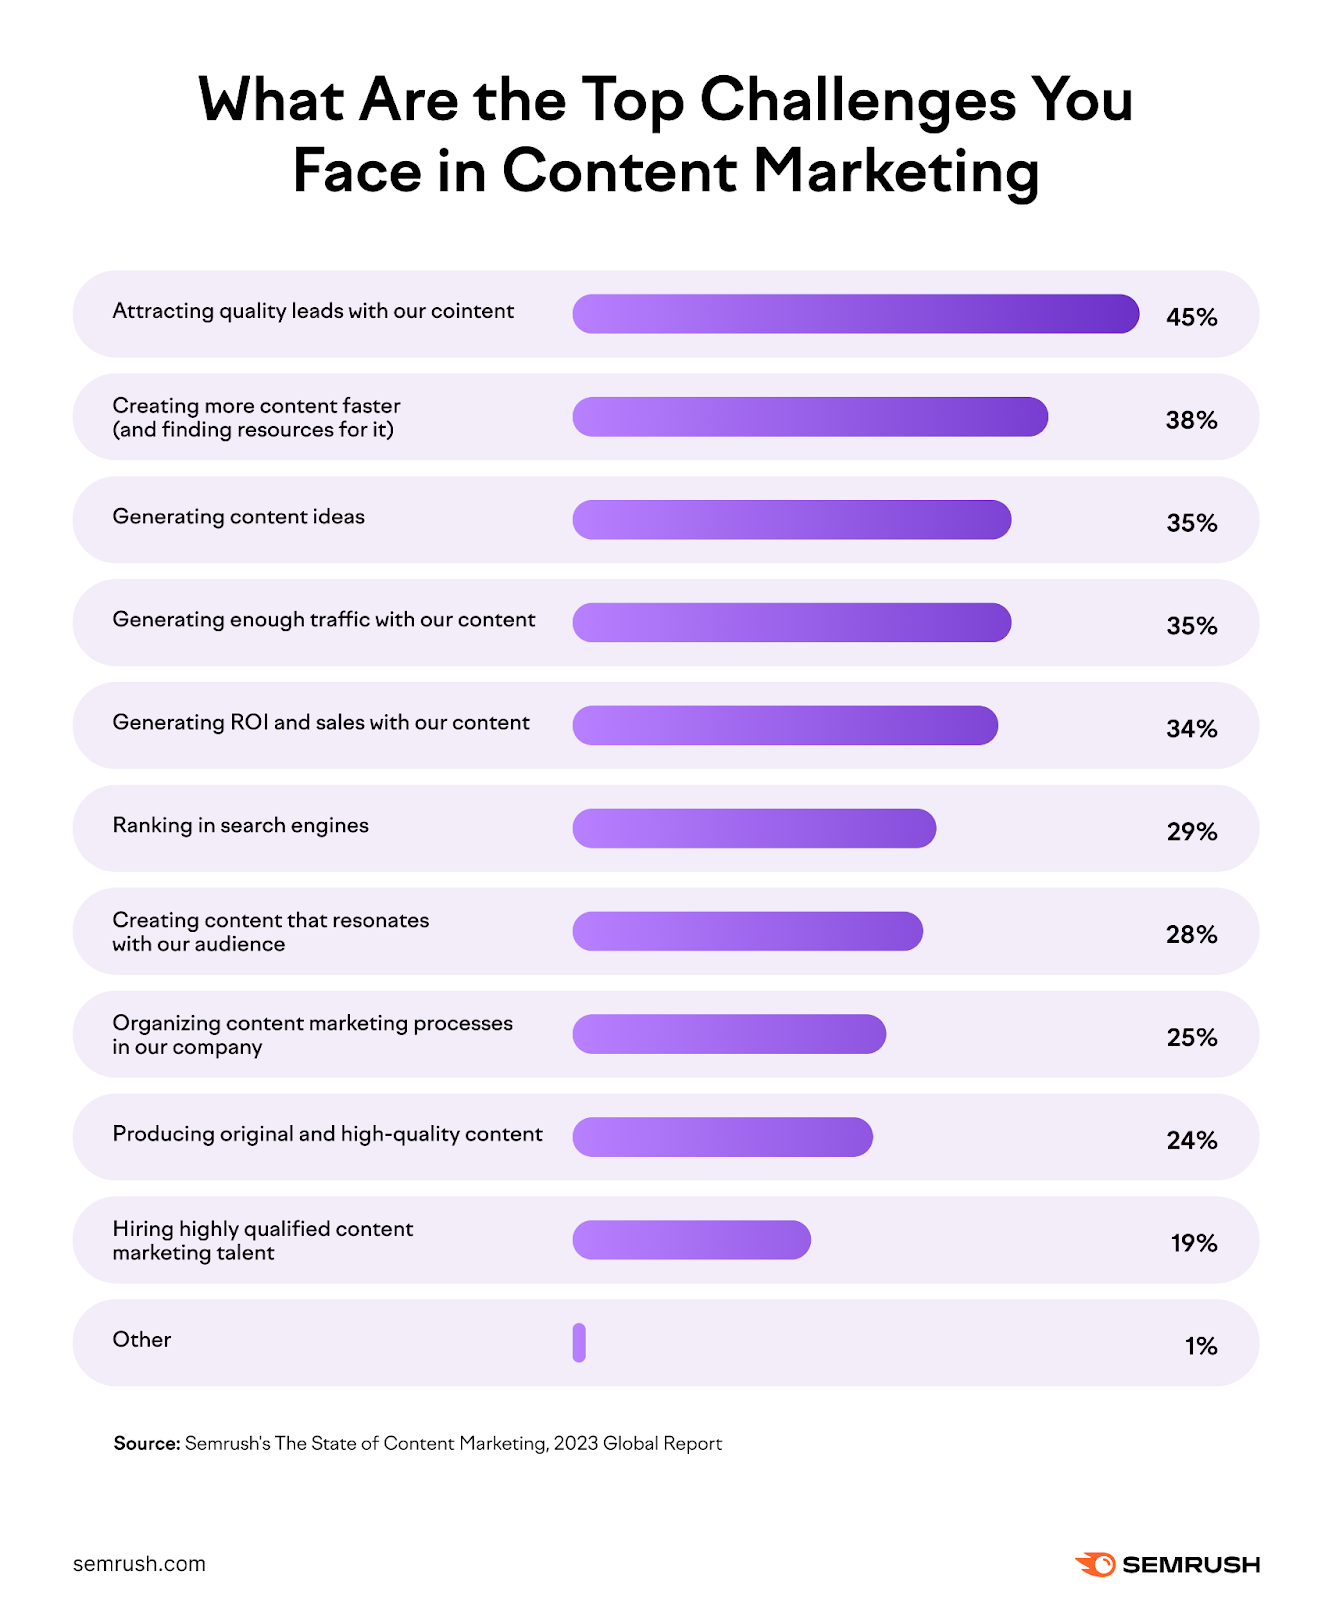 top challenges in content marketing chart showing attracting quality leads, creating more content, and generating content ideas and traffic as the top 4